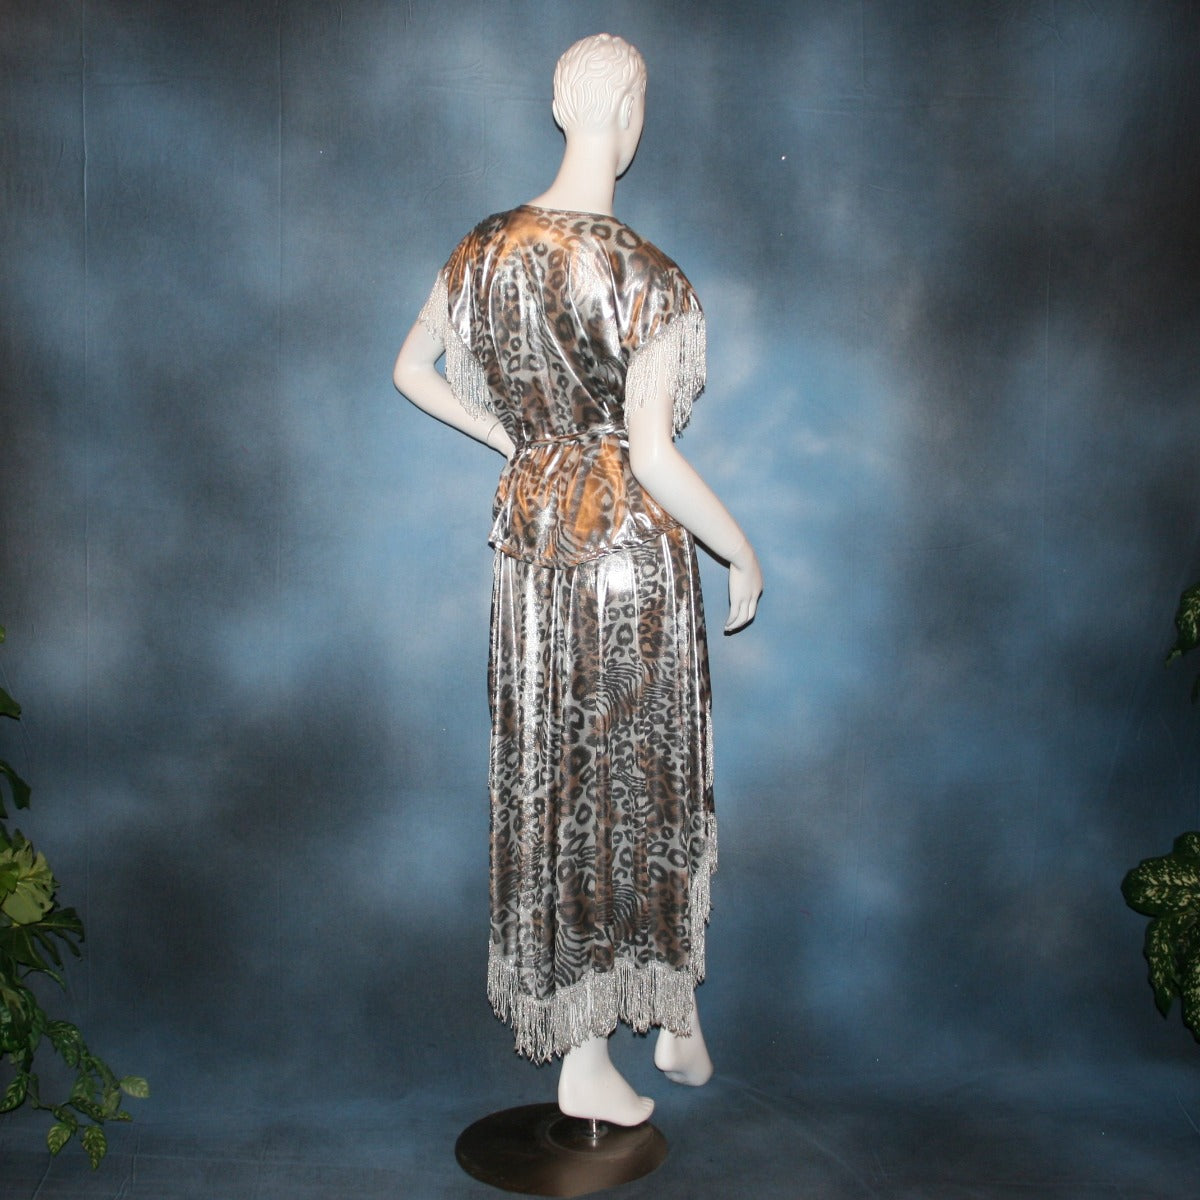 Crystal's Creations back view of Silver two panel Latin/rhythm skirt & top that has hand beading on neck edge of textured silver beads, with metallic fringe, was created of a leopard print knit with silver metallic on one side.